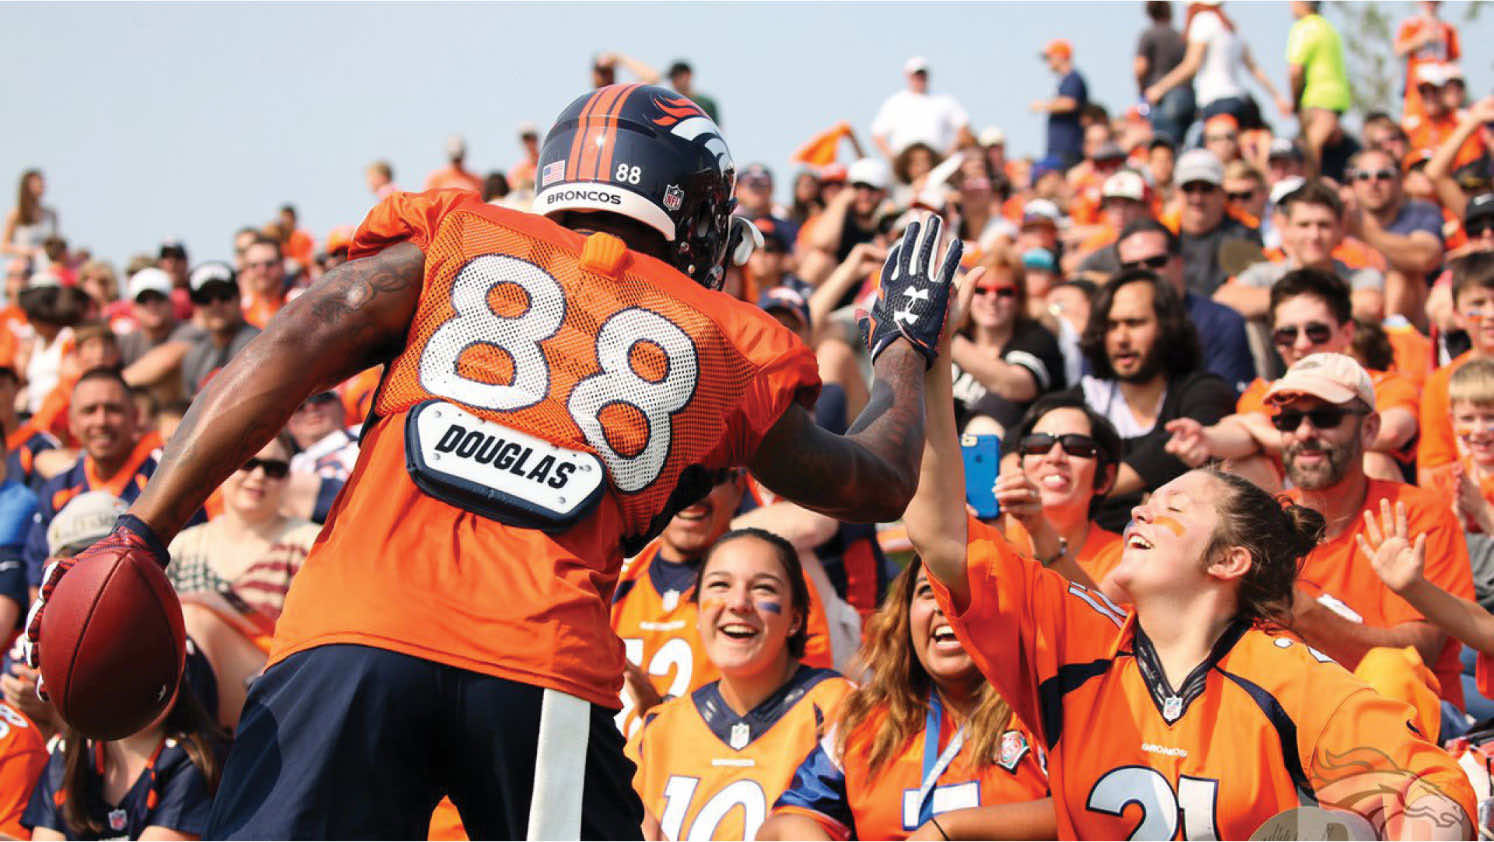 Broncos - Player with 88 jersey